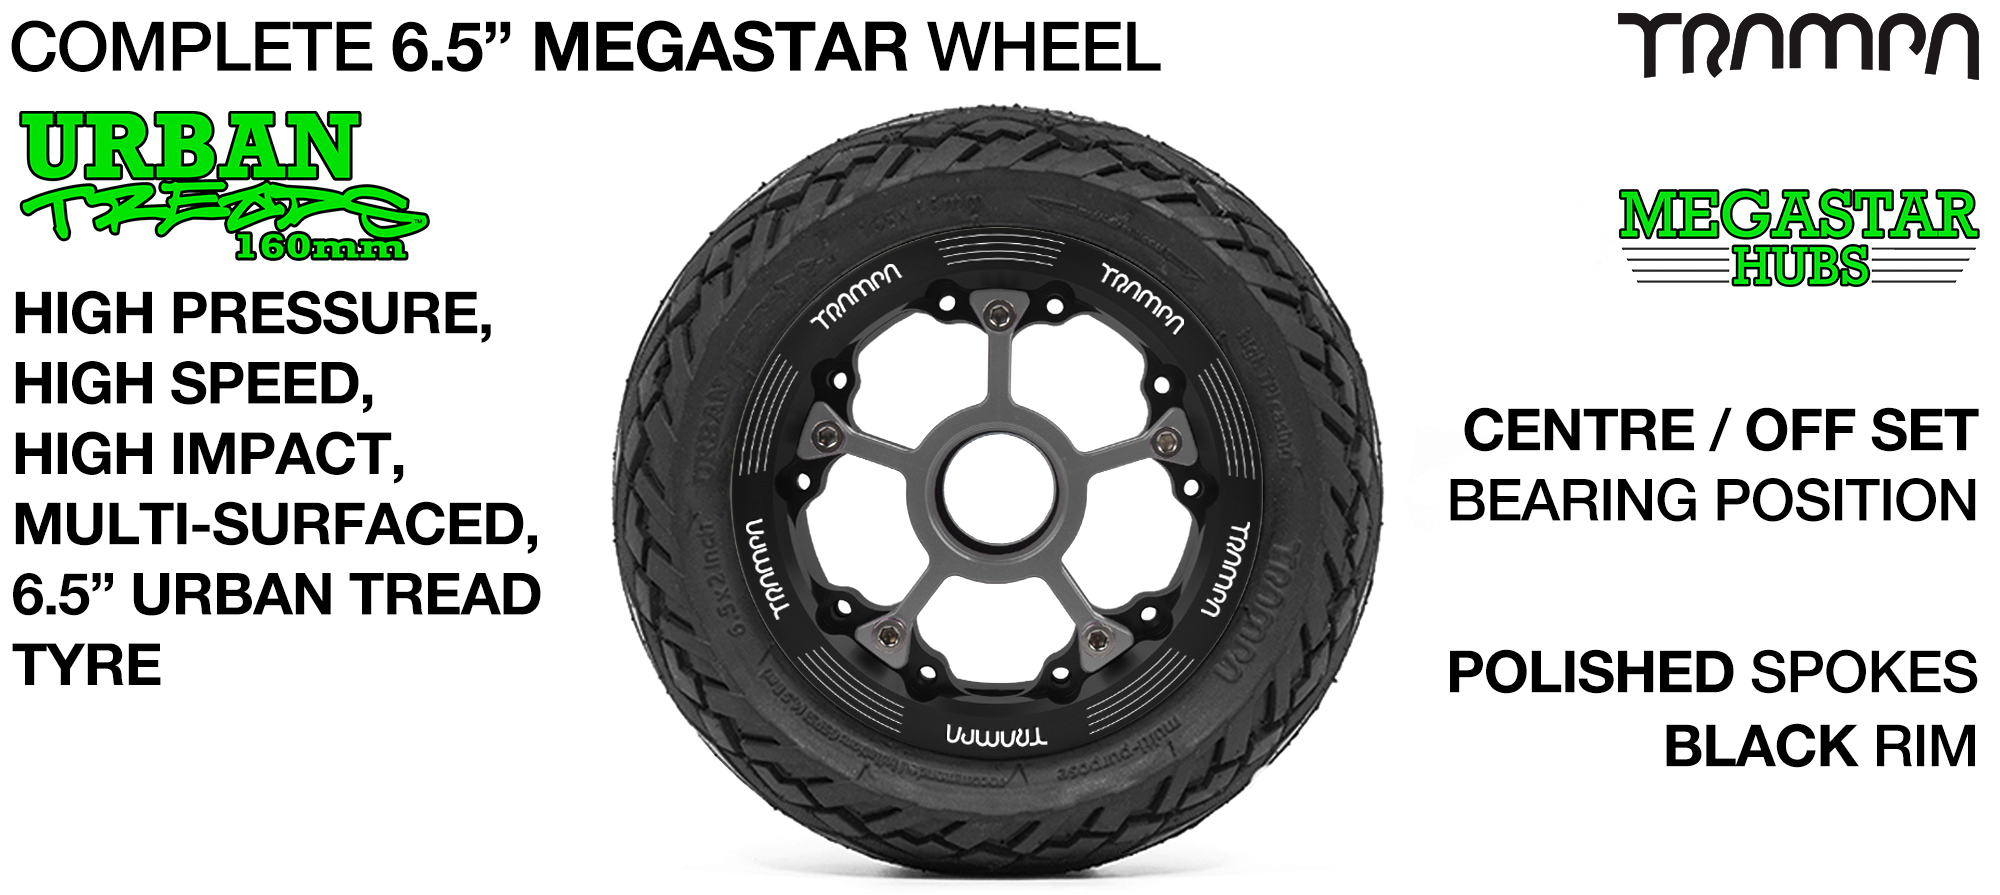 CENTER-SET MEGASTAR 8 Hub with BLACK Rims & POLISHED Spokes with the amazing Low Profile 6.5 Inch URBAN Treads Tyres 